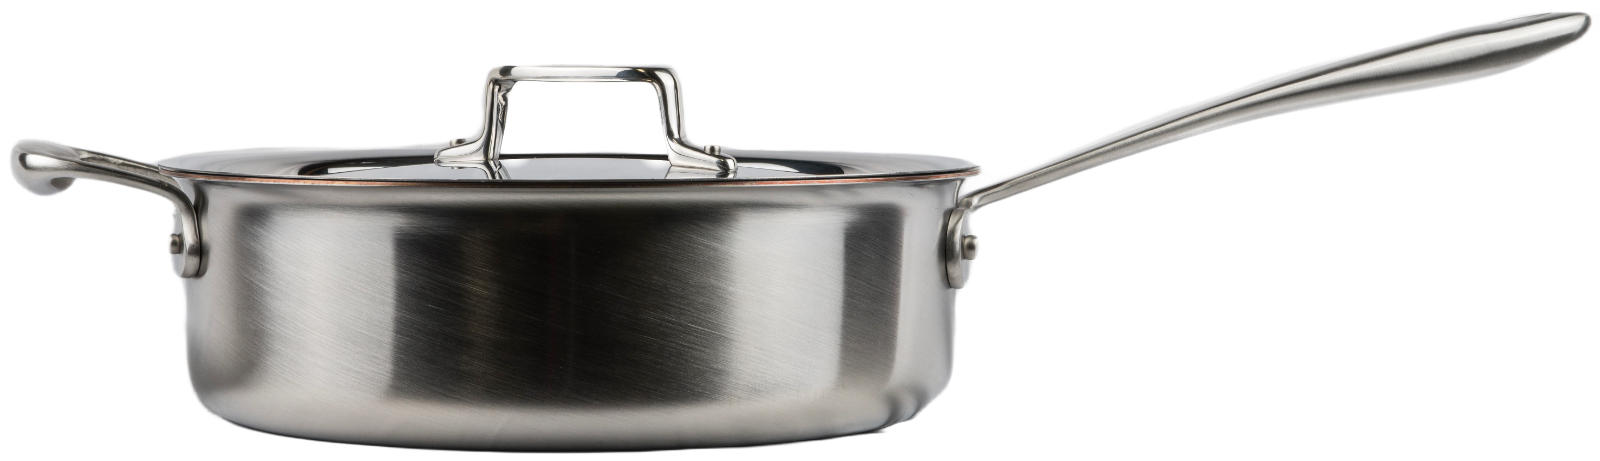 Primary image for All-Clad TK™ 5-Ply Copper Core 5-qt Sauteuse with D5 Lid